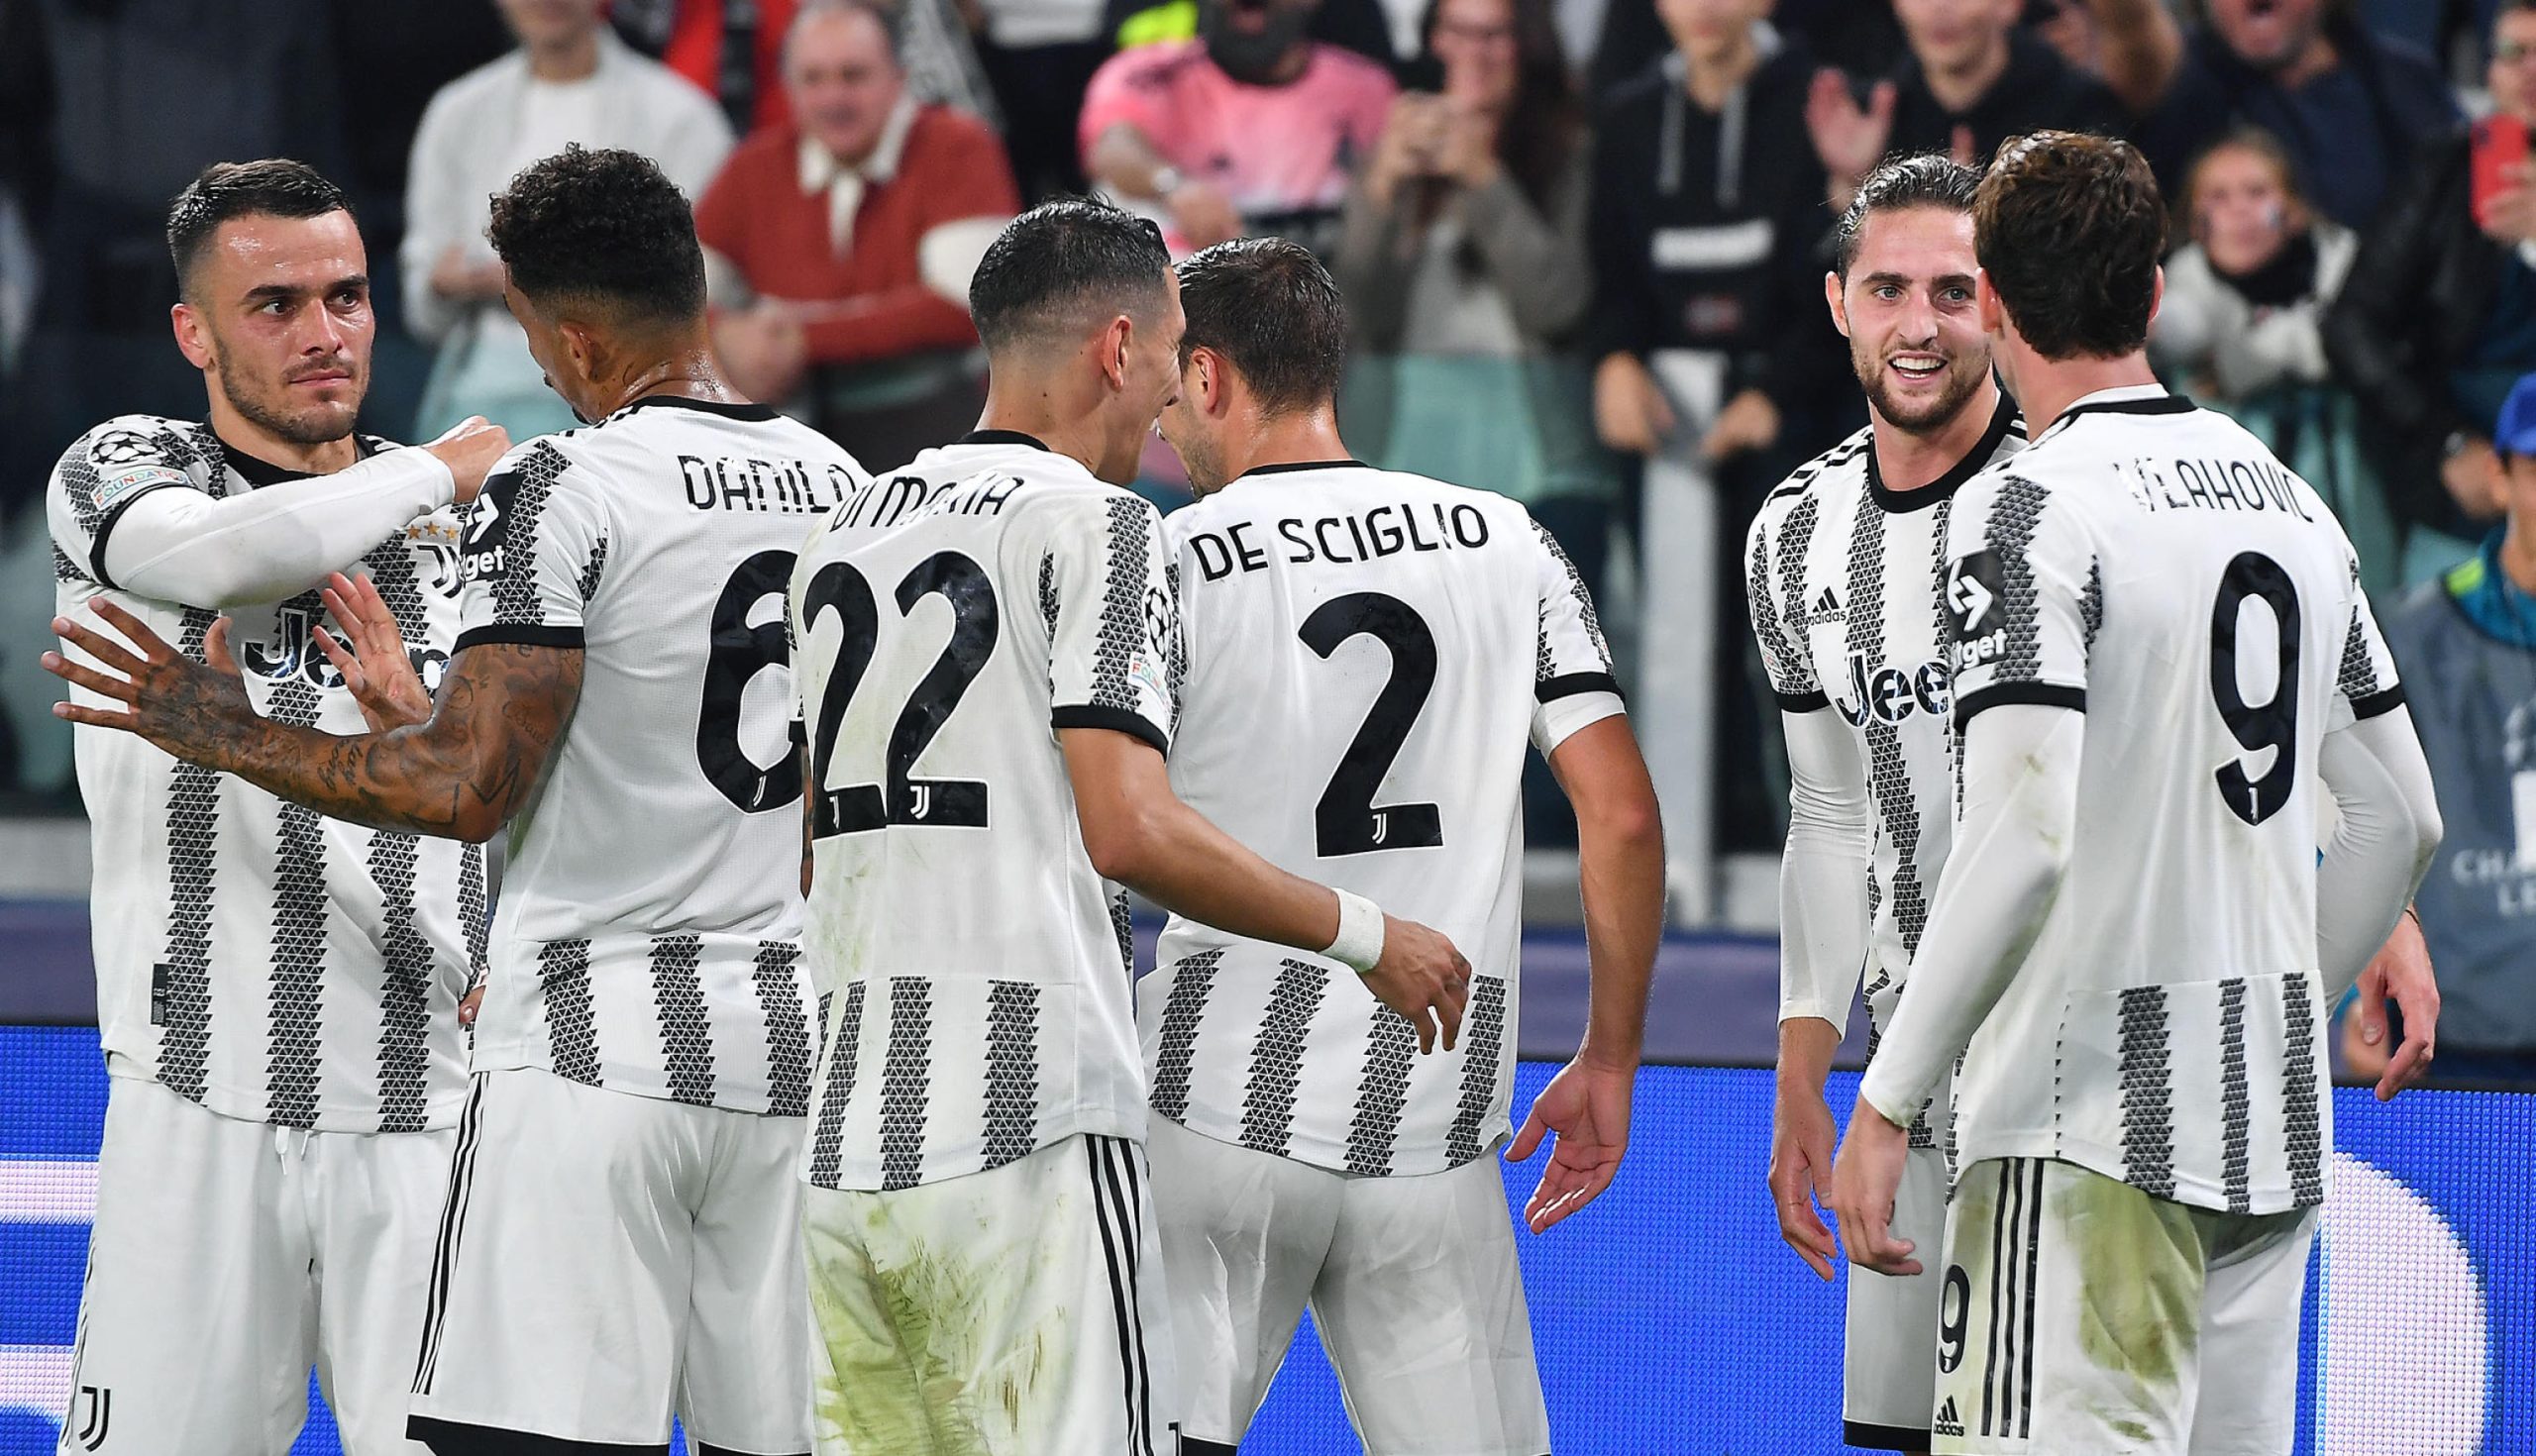 epa10225795 Juventus? Adrien Rabiot celebrates scoring with teammates during the UEFA Champions League group stage soccer match Juventus FC vs Maccabi Haifa FC at the Allianz Stadium in Turin, Italy, 5 Occtober 2022. EPA-EFE/ALESSANDRO DI MARCO